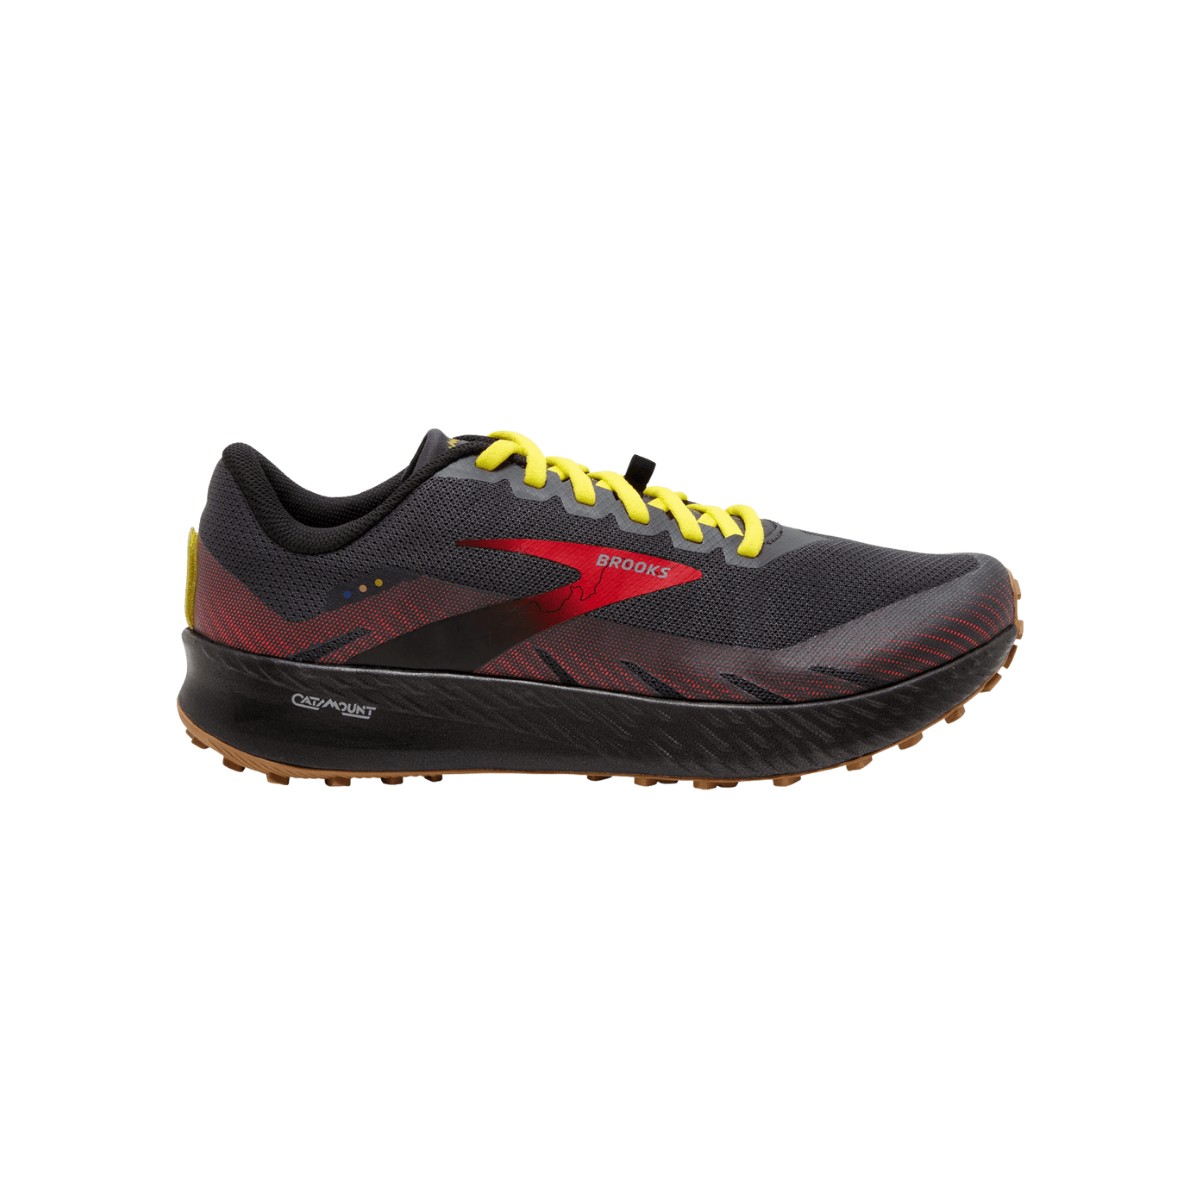 Chaussures Brooks Catamount Noir Rouge Jaune SS22, Taille 41 - EUR